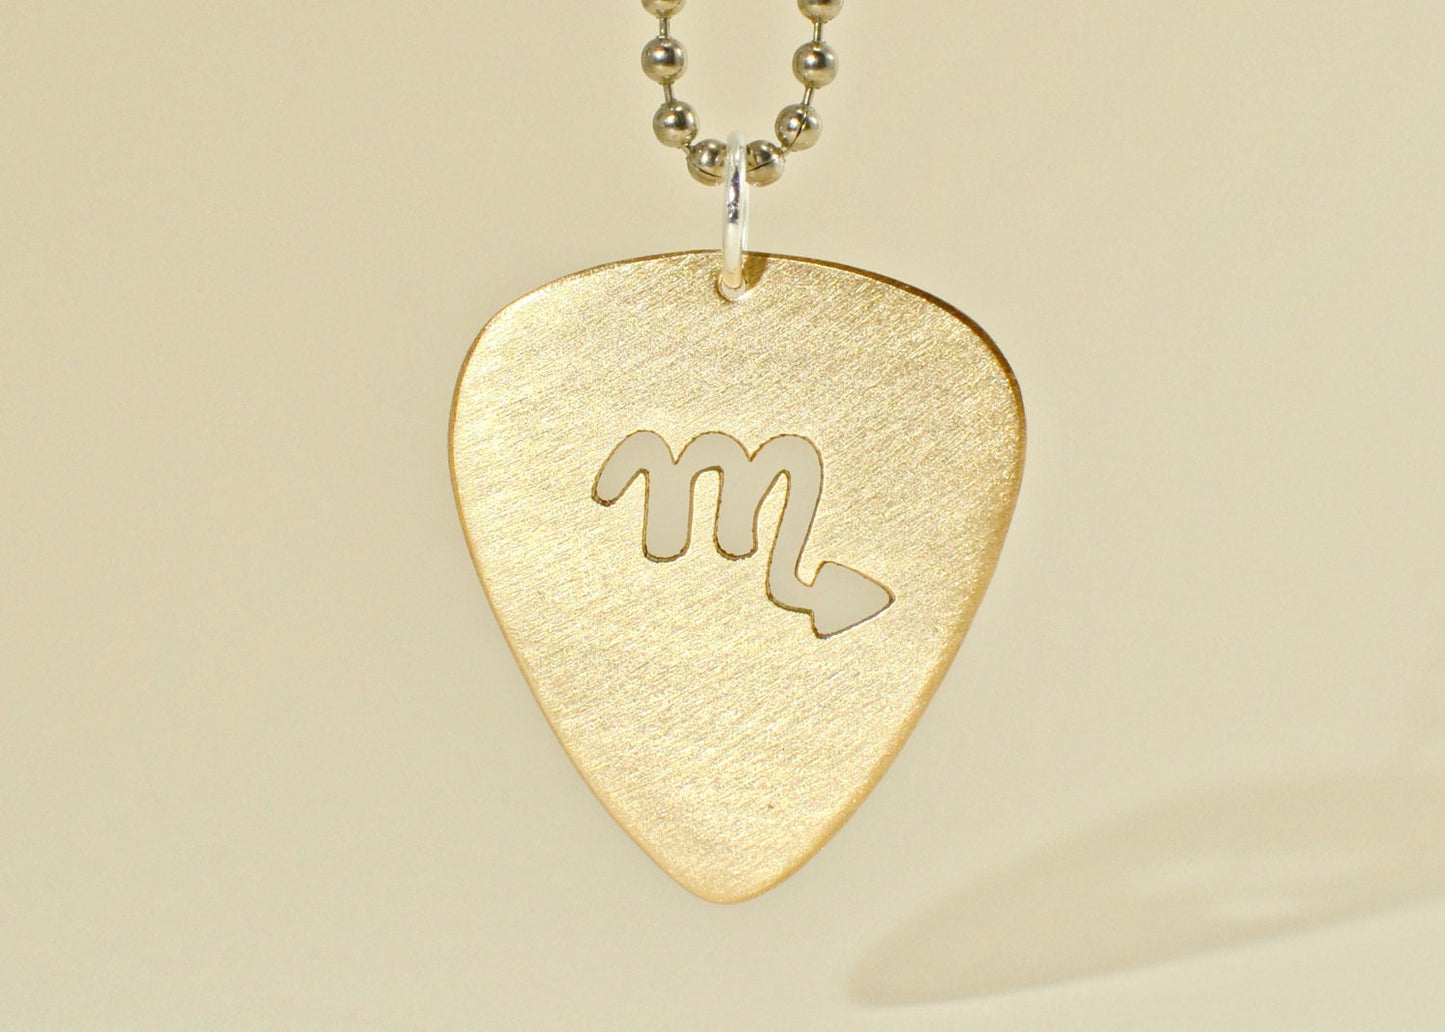 Zodiac guitar pick necklace series with cutout designs